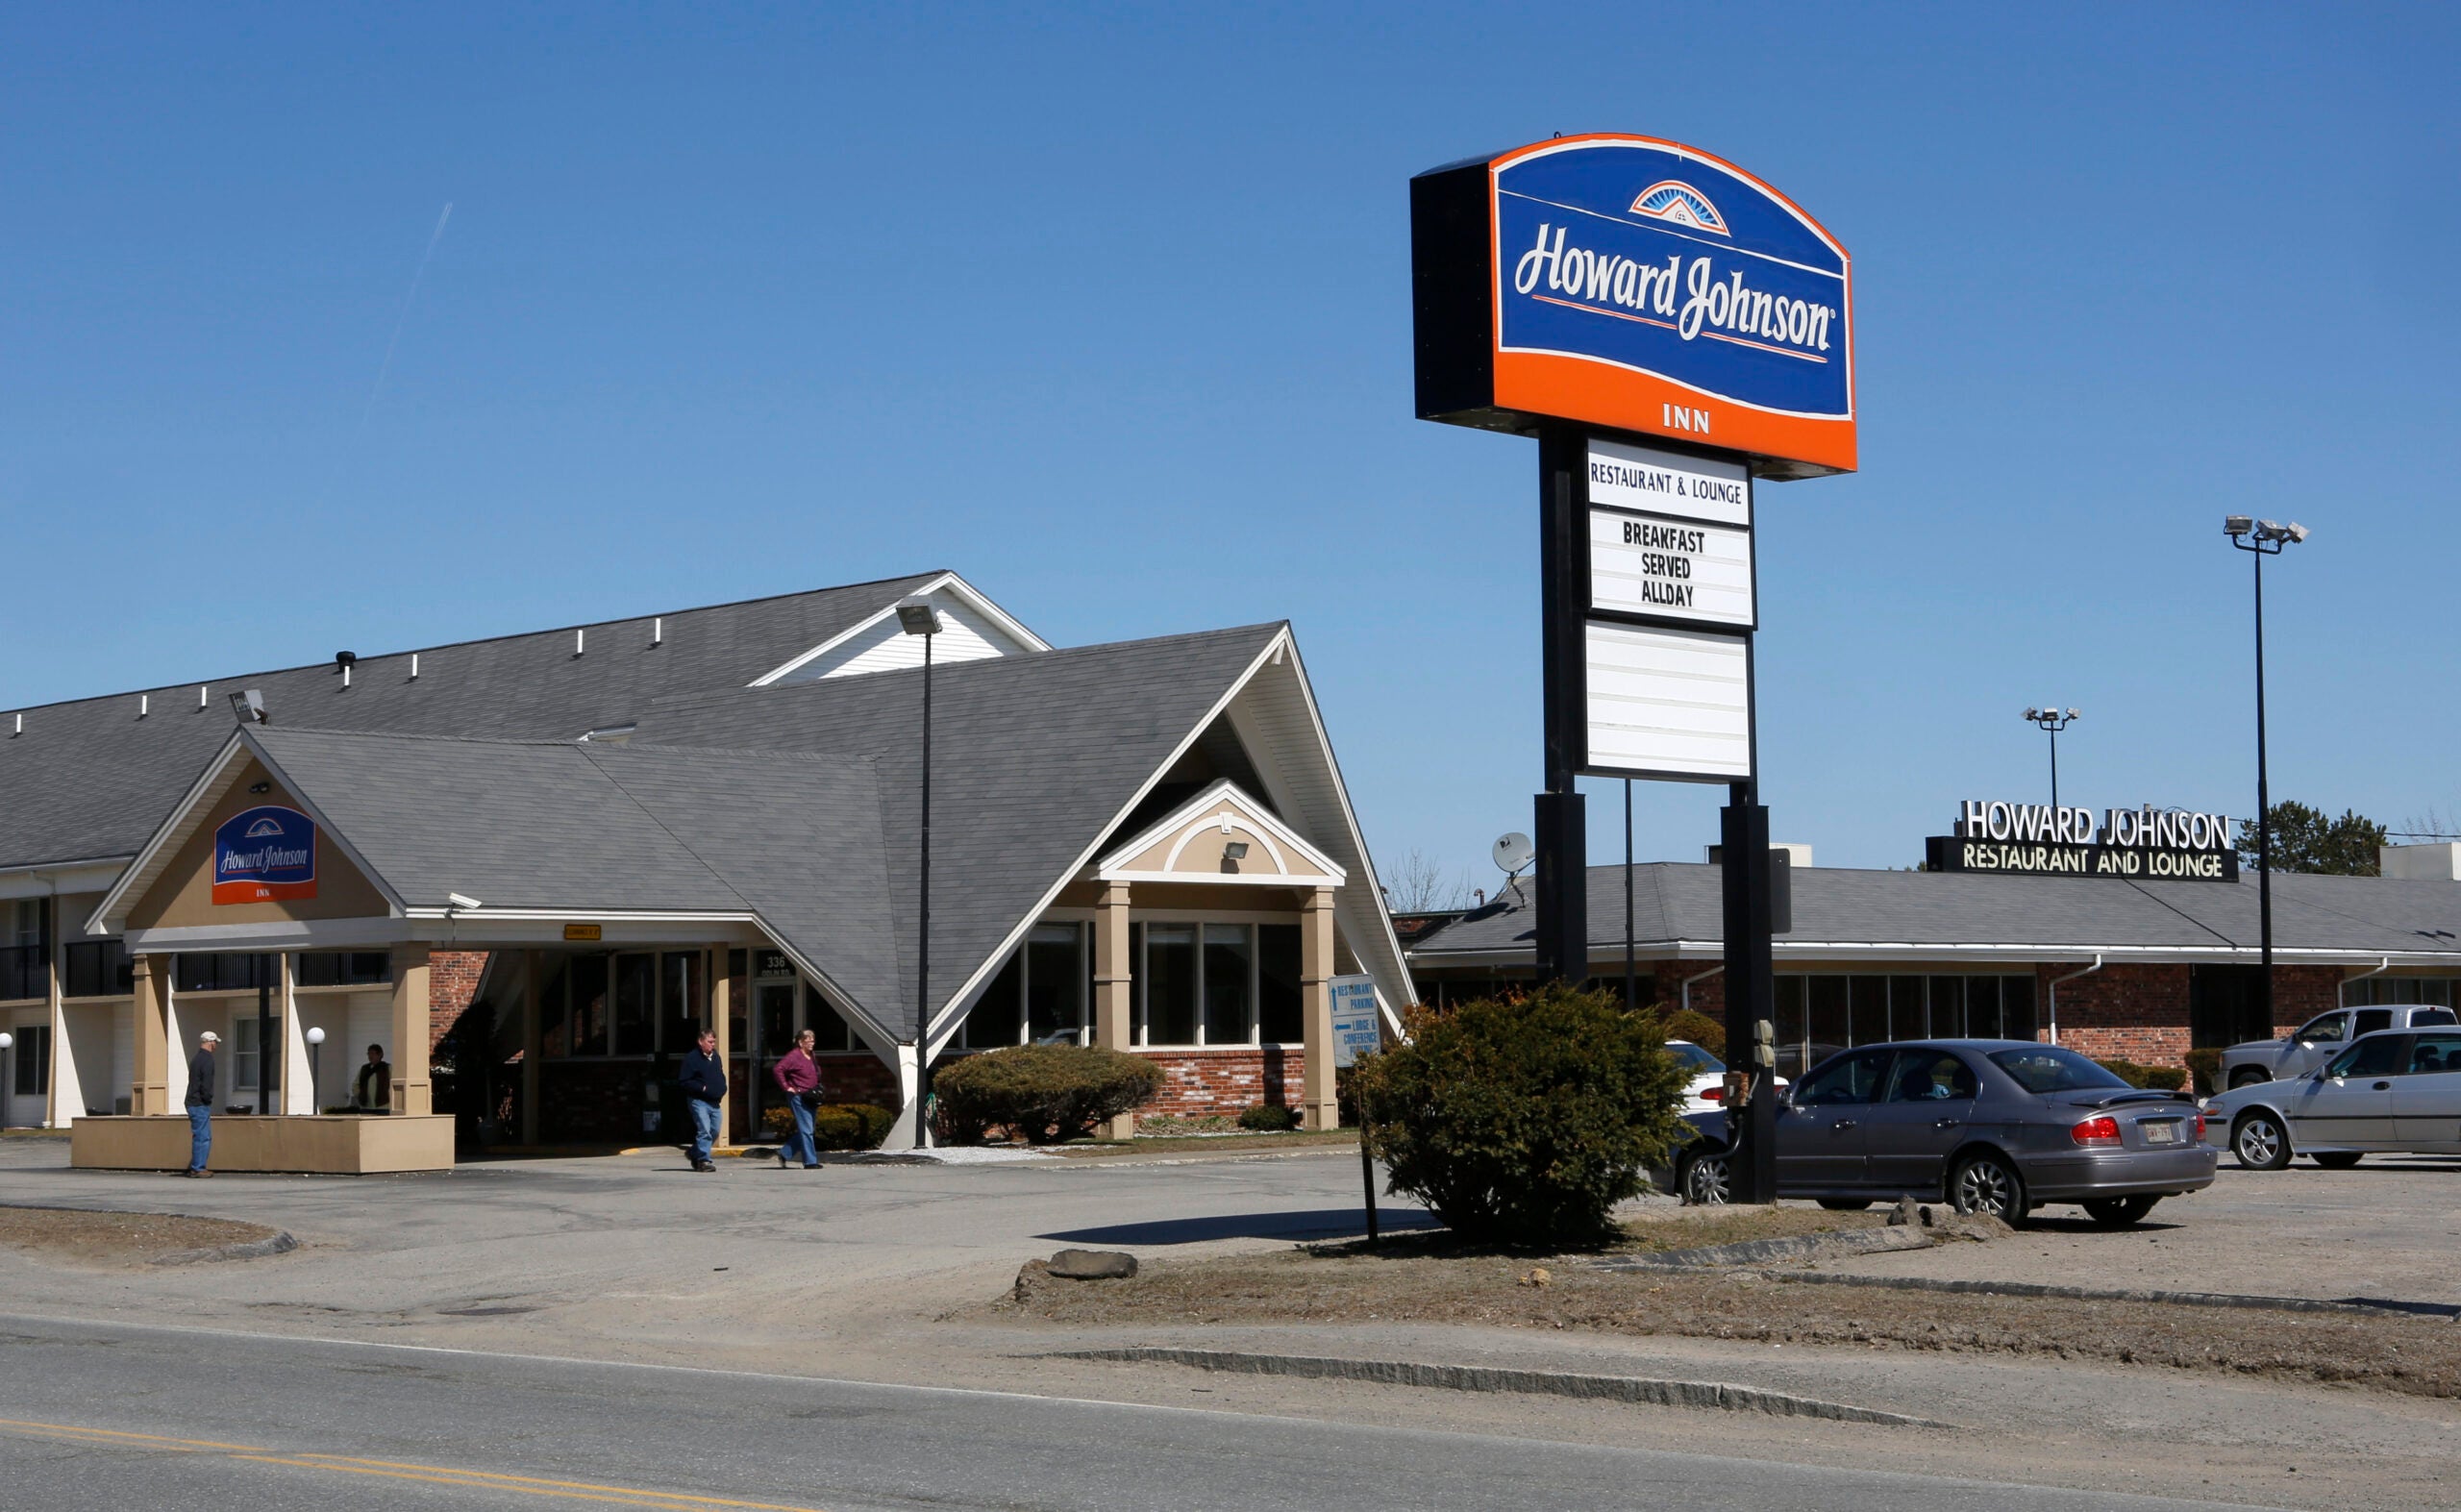 Howard Johnson's restaurant to close in Maine, leaving only 1 more.